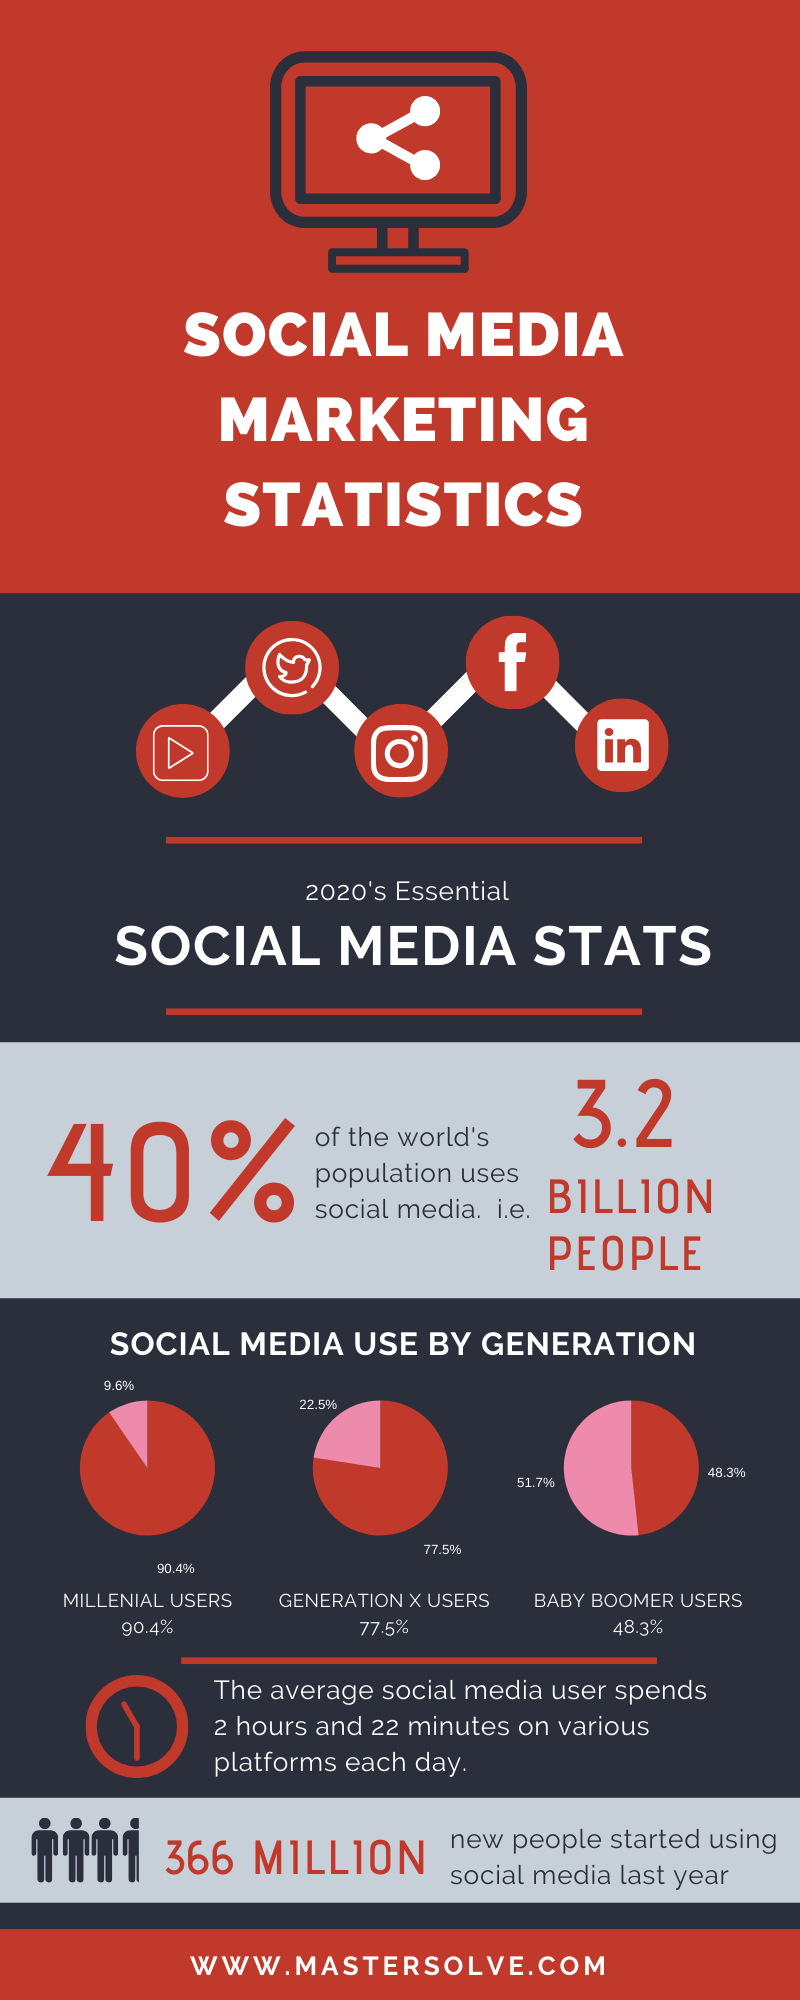 Social Media Facts to Guide Your Marketing Strategy